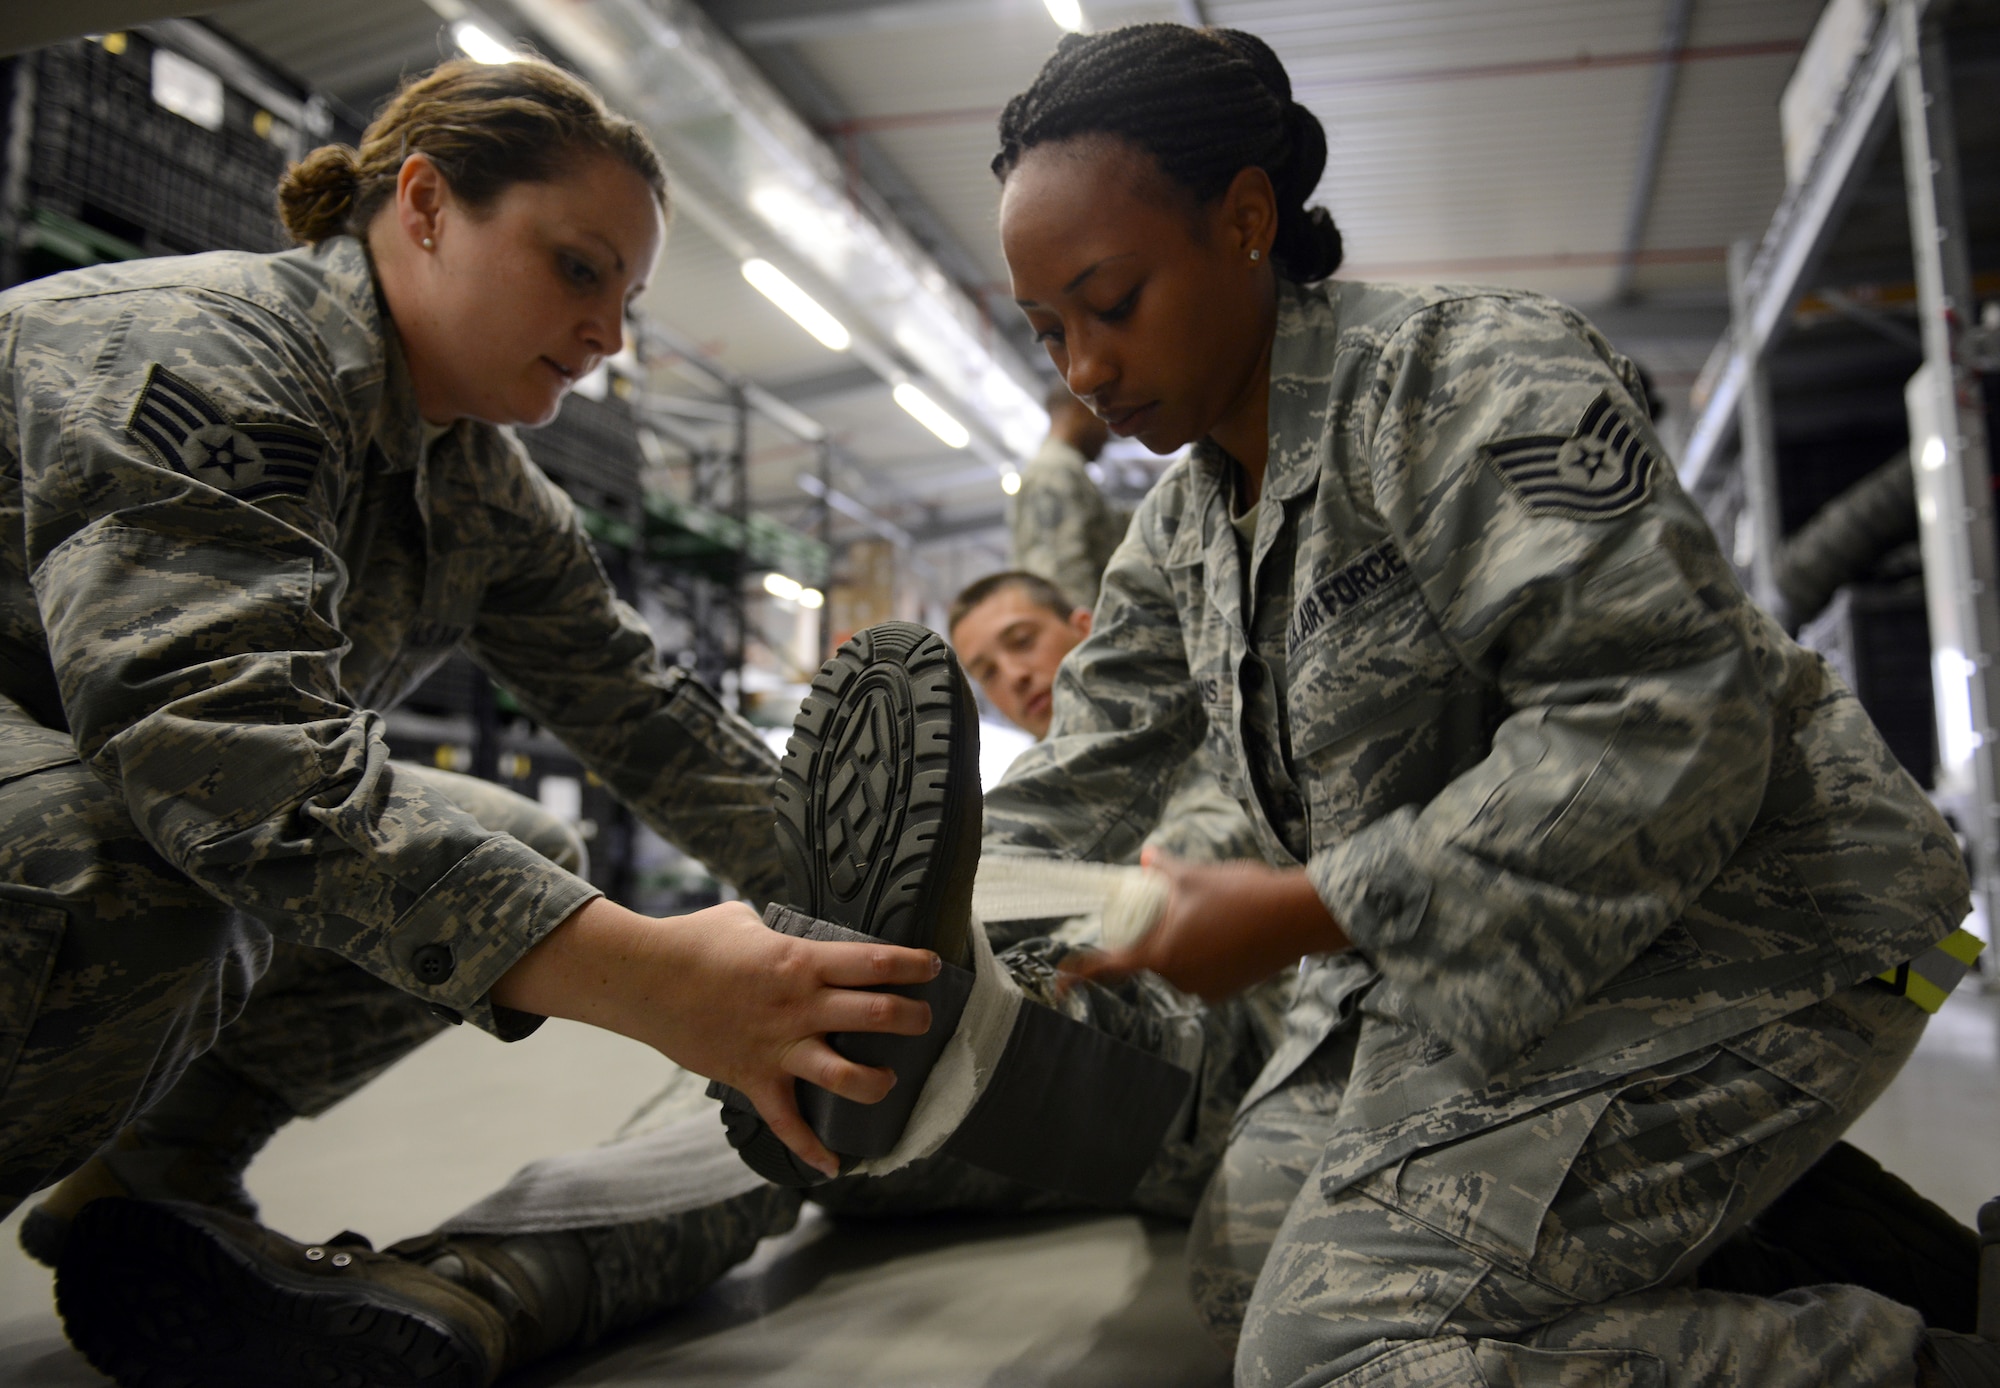 Staff Sgt. Lacy Owens, 86th Medical Operations Squadron medical technician, assists Tech. Sgt. Ambree Evans, 86th Aerospace Medical Squadron bioenvironmental technician, wrap a splint during a self-aid and buddy care rodeo at Ramstein Air Base, Germany, July 10, 2014. Members of the 86th Medical Group attended the refresher course to sharpen potentially life-saving techniques taught in SABC. (U.S. Air Force photo/Senior Airman Timothy Moore)